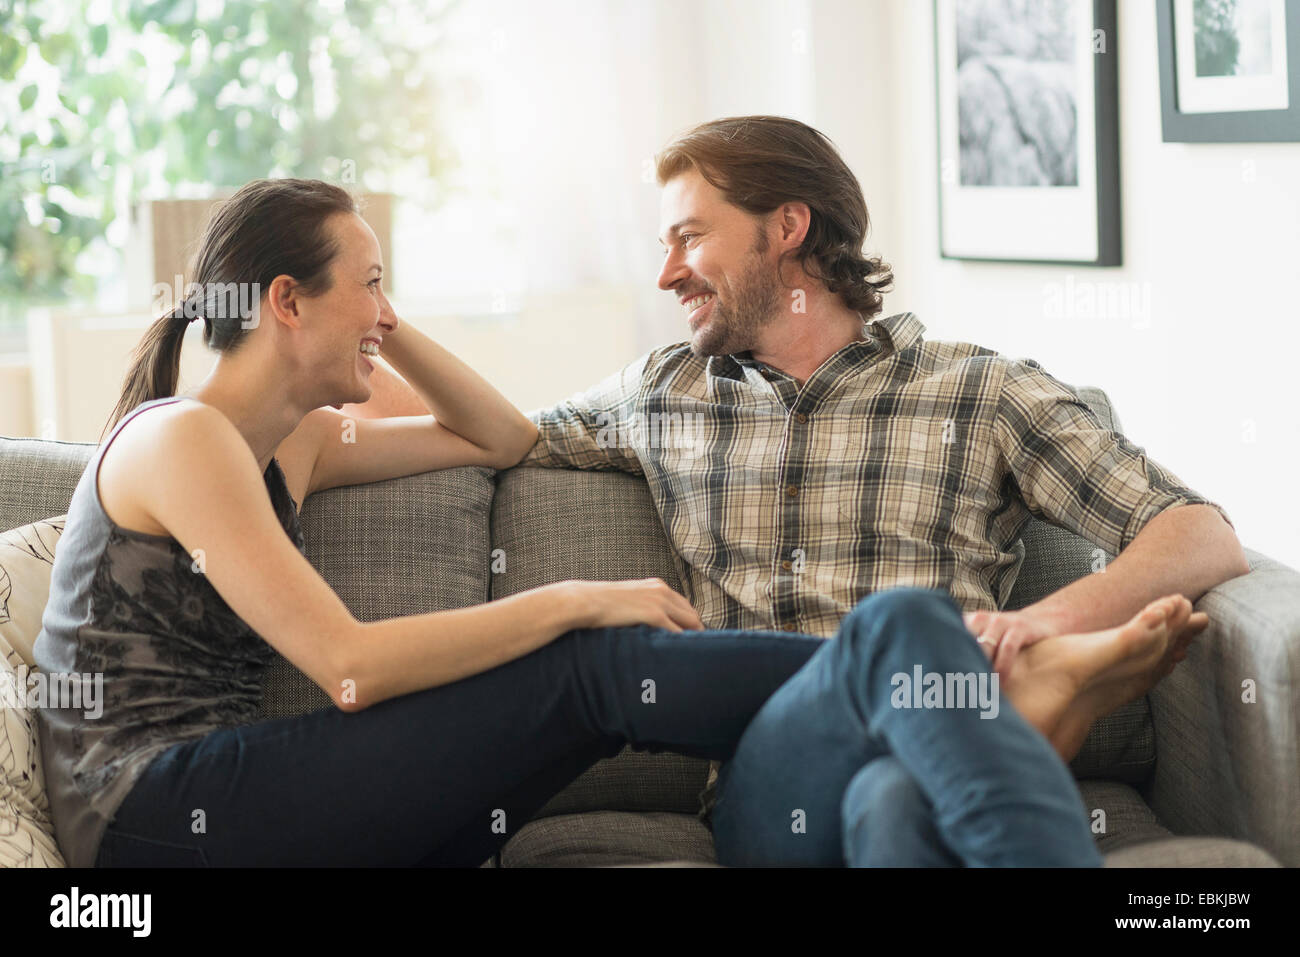 Cheerful couple relaxing on sofa Stock Photo